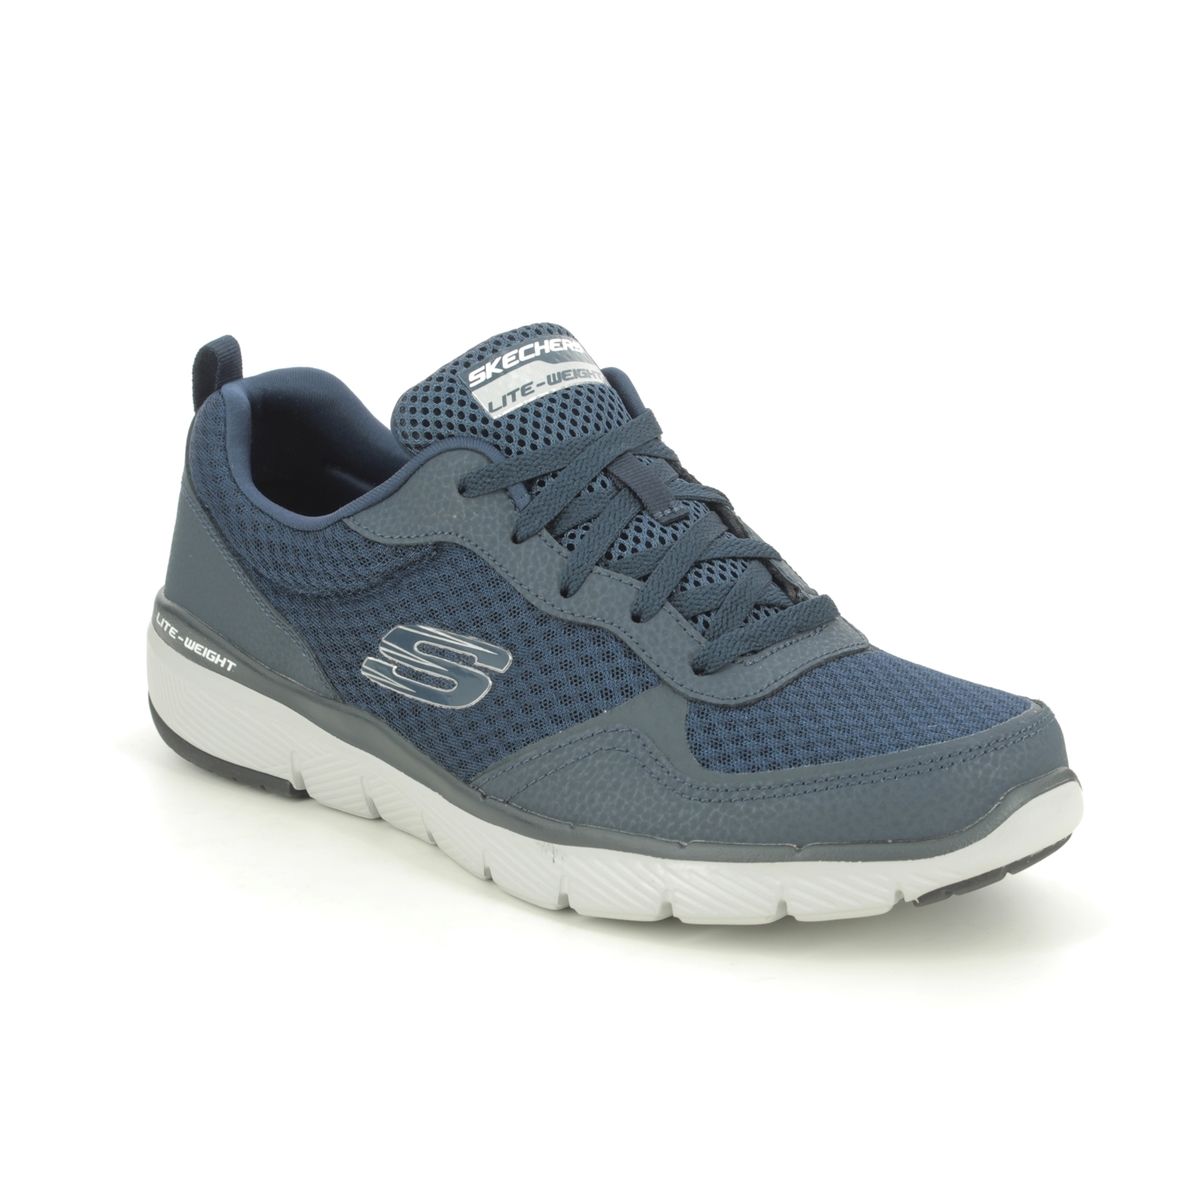 Skechers Flex Advantage 3 NVY Navy Mens trainers 52954 in a Plain Textile in Size 12